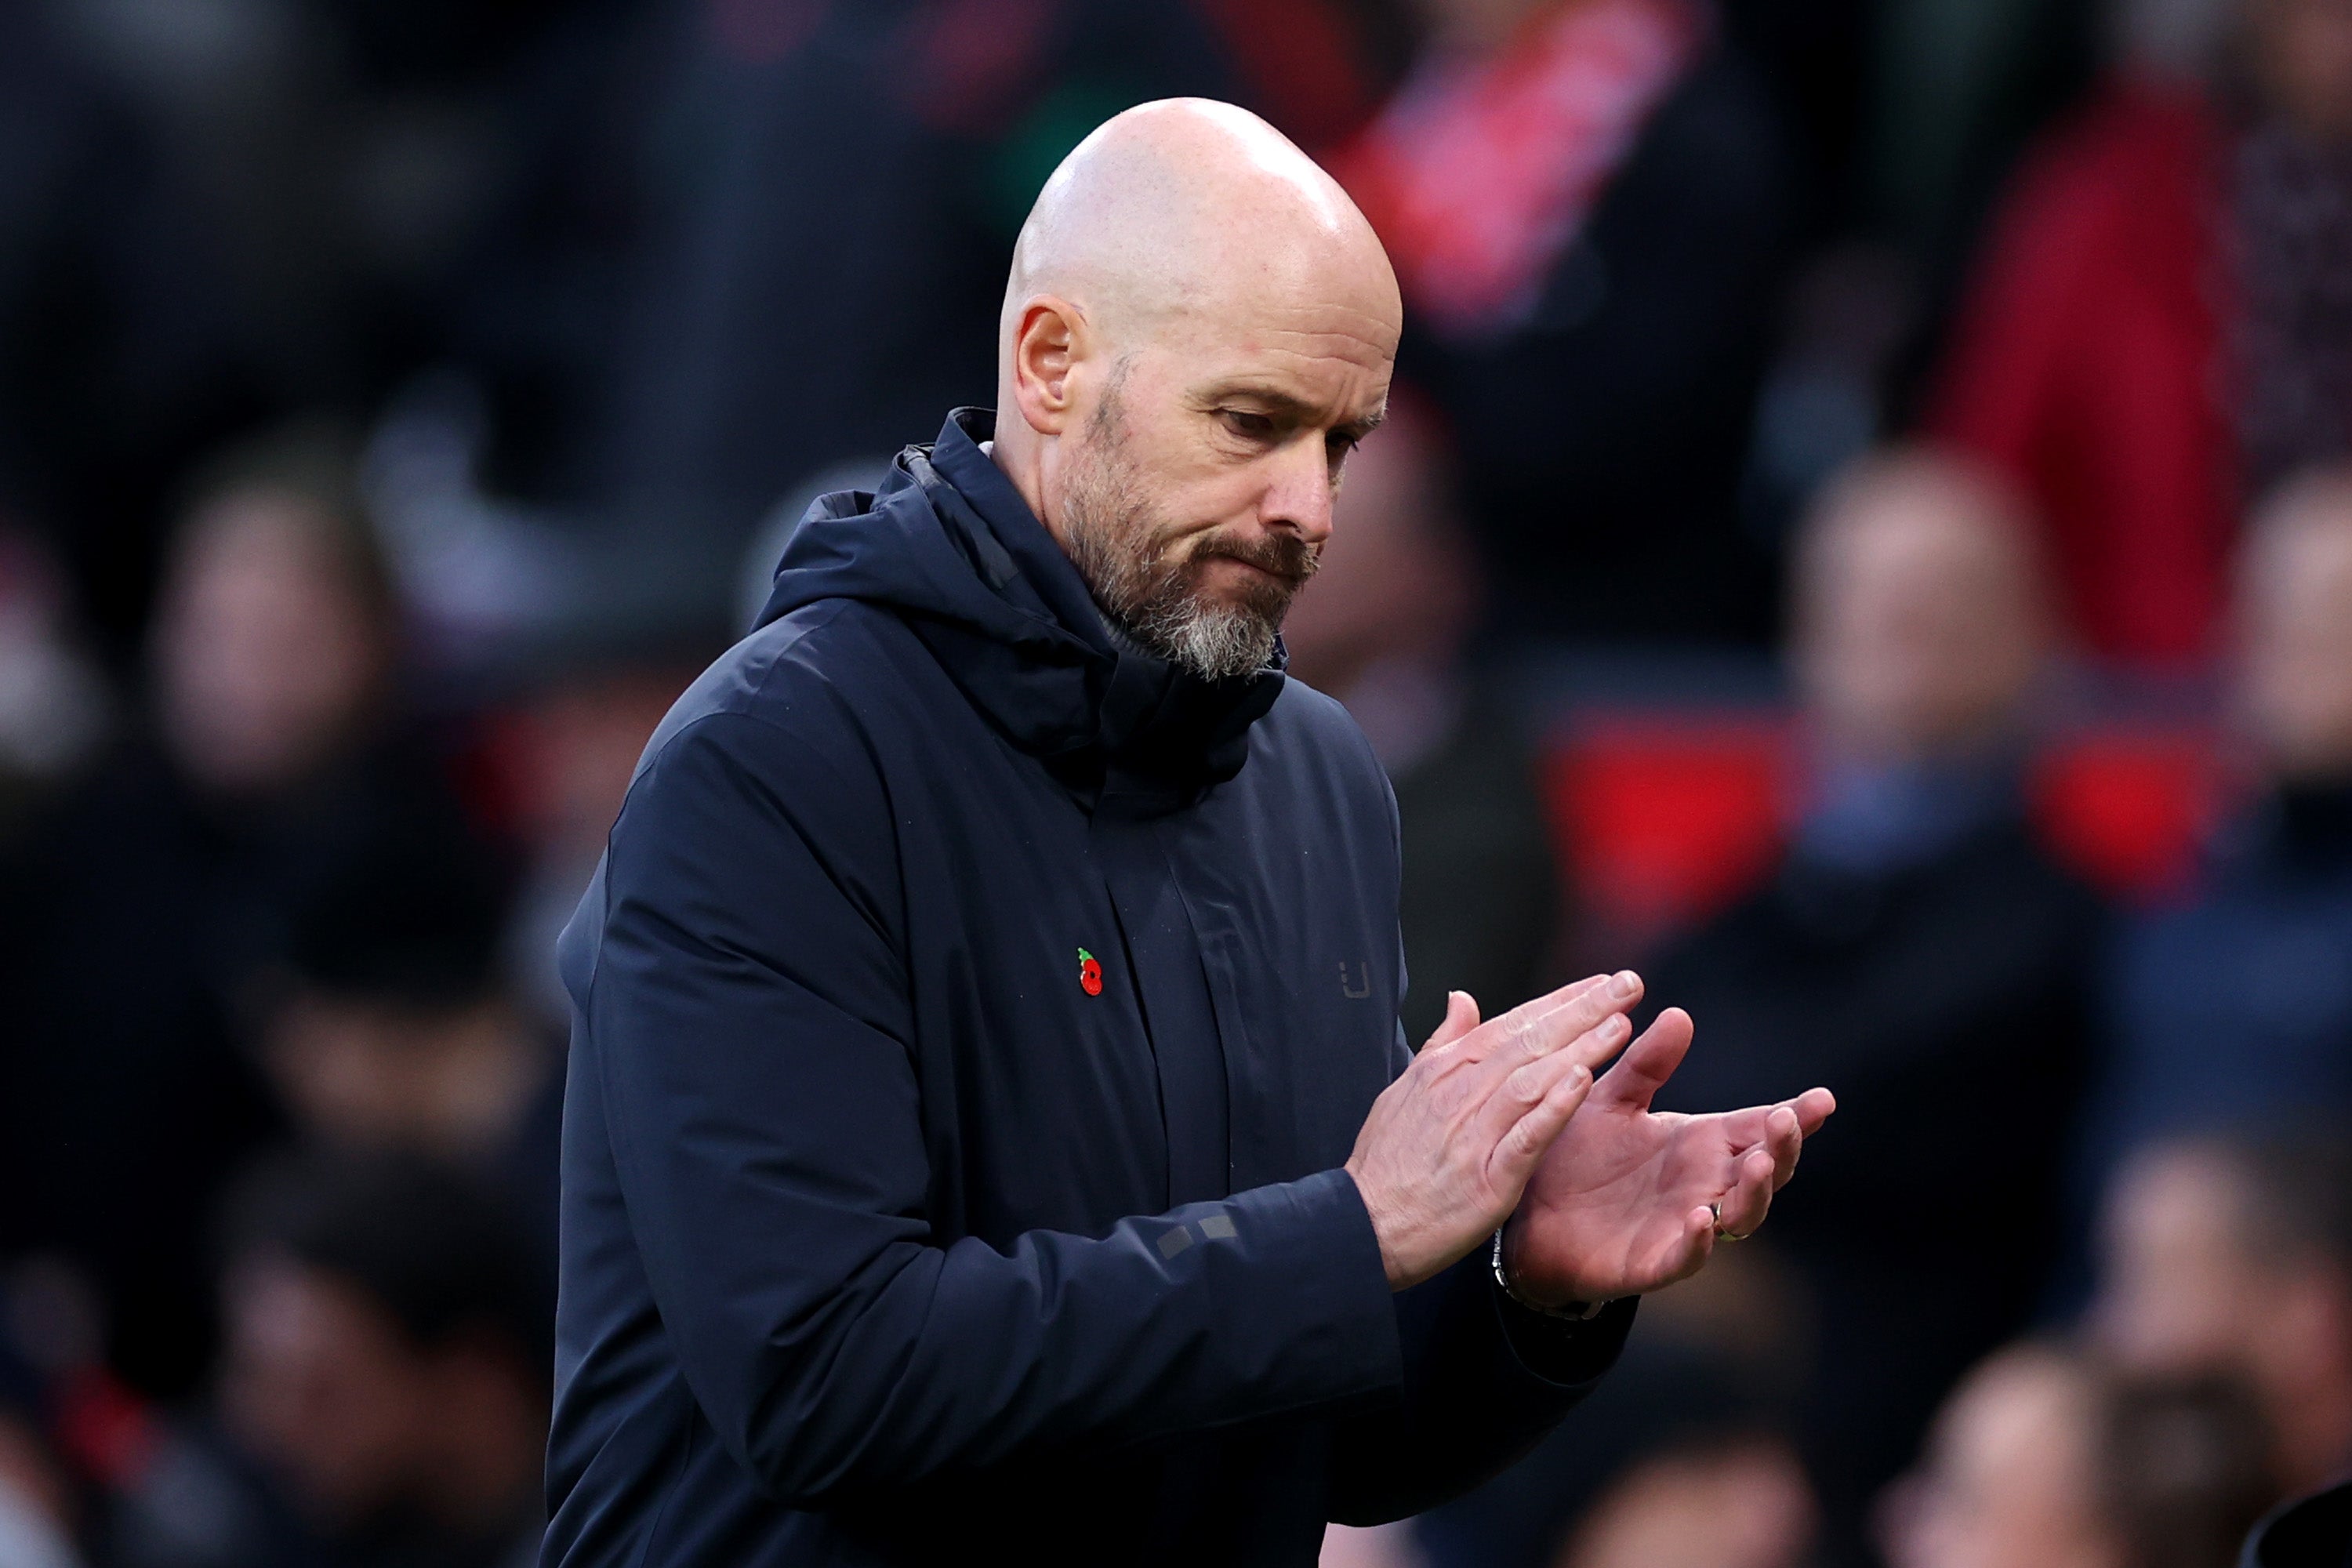 Why Erik ten Hag will not be on touchline for Everton vs Manchester United | The Independent